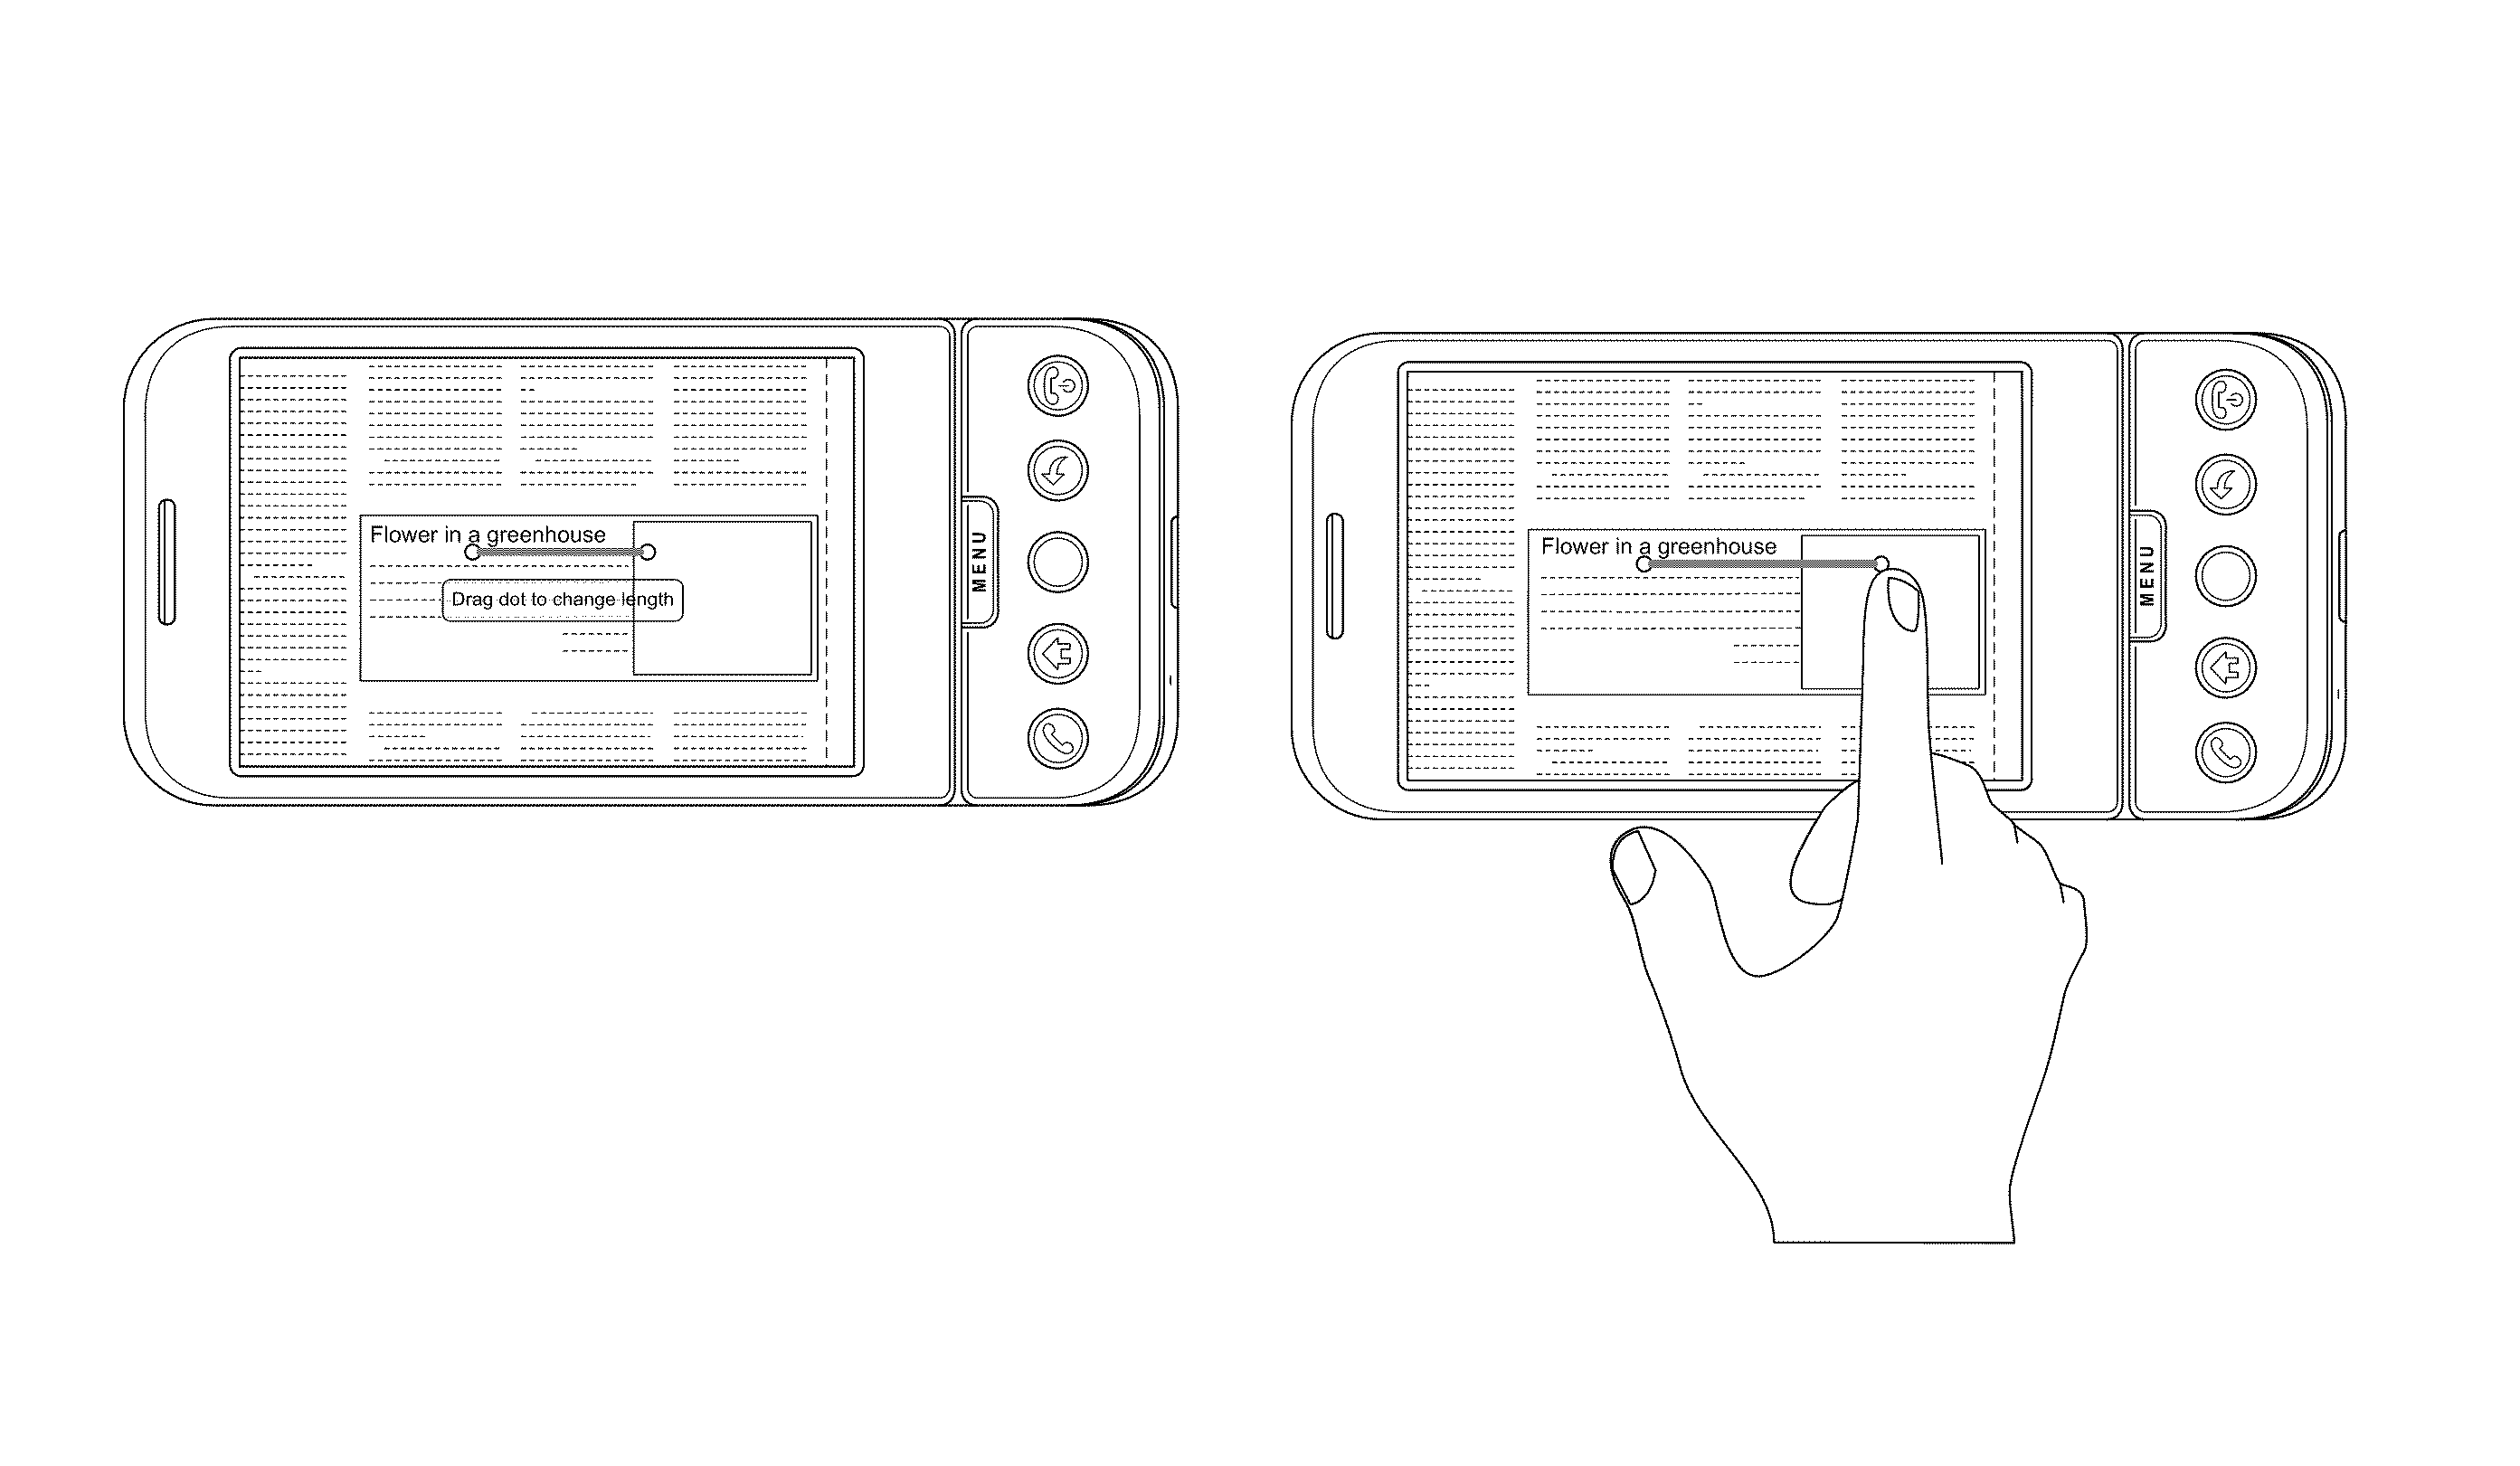 On-screen guideline-based selective text recognition